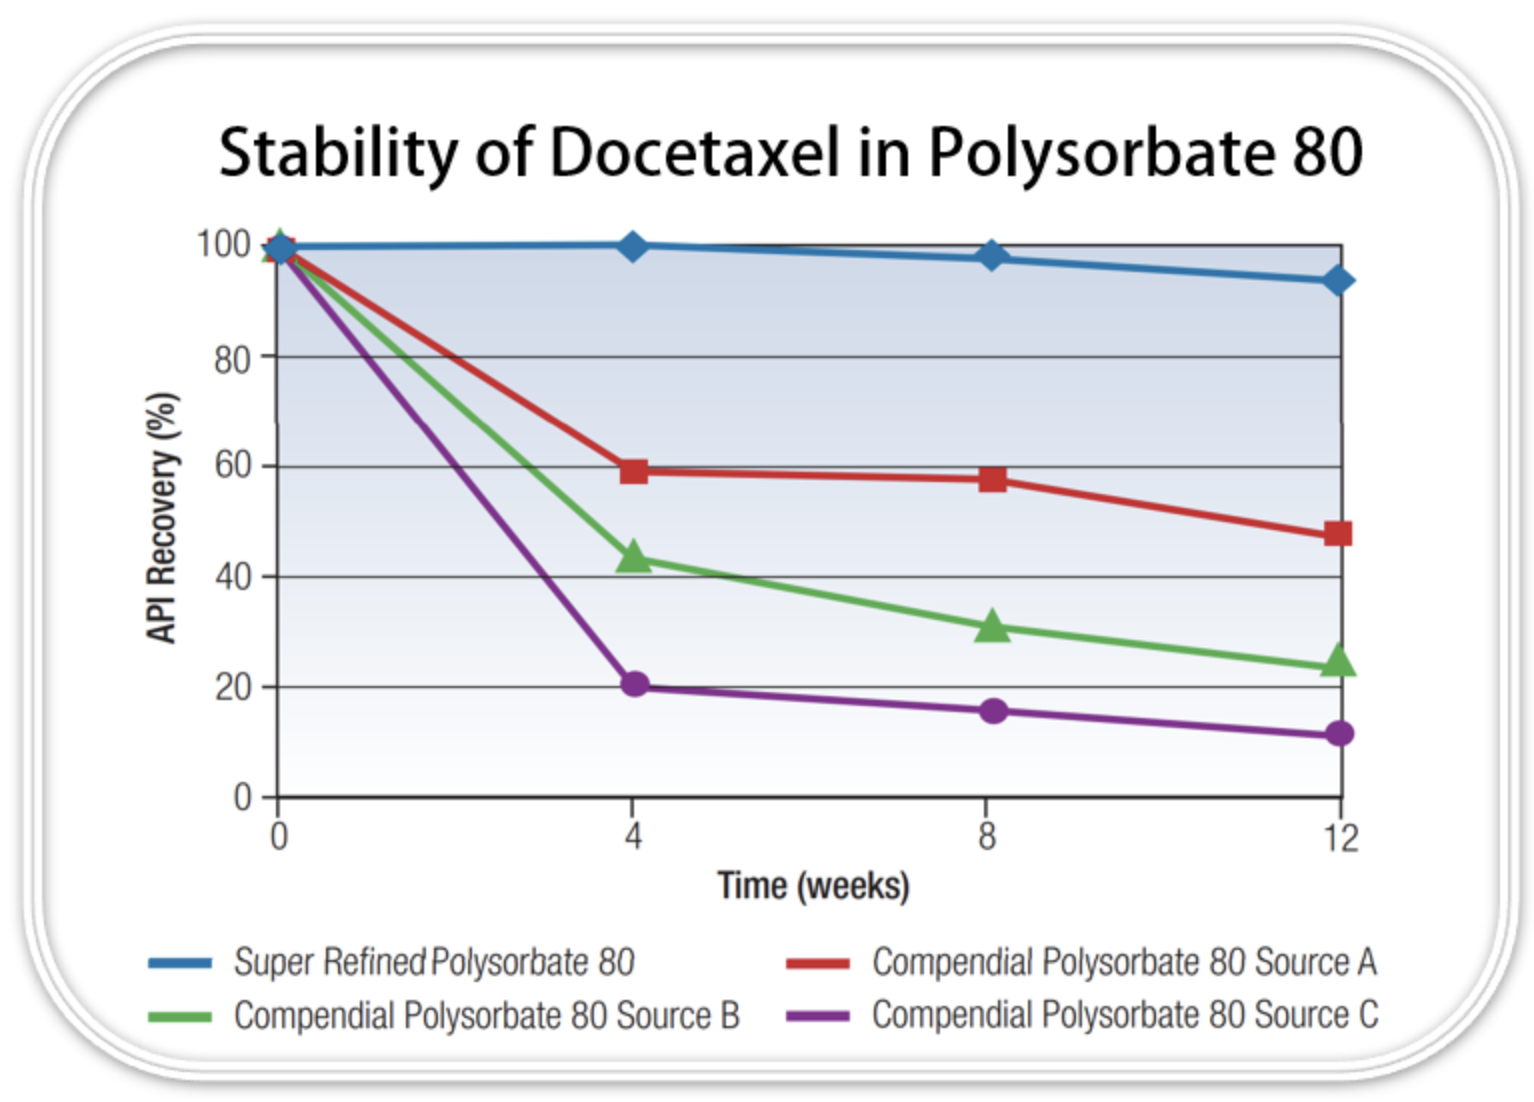 Stability of docetaxel in various grades of polysorbate 80